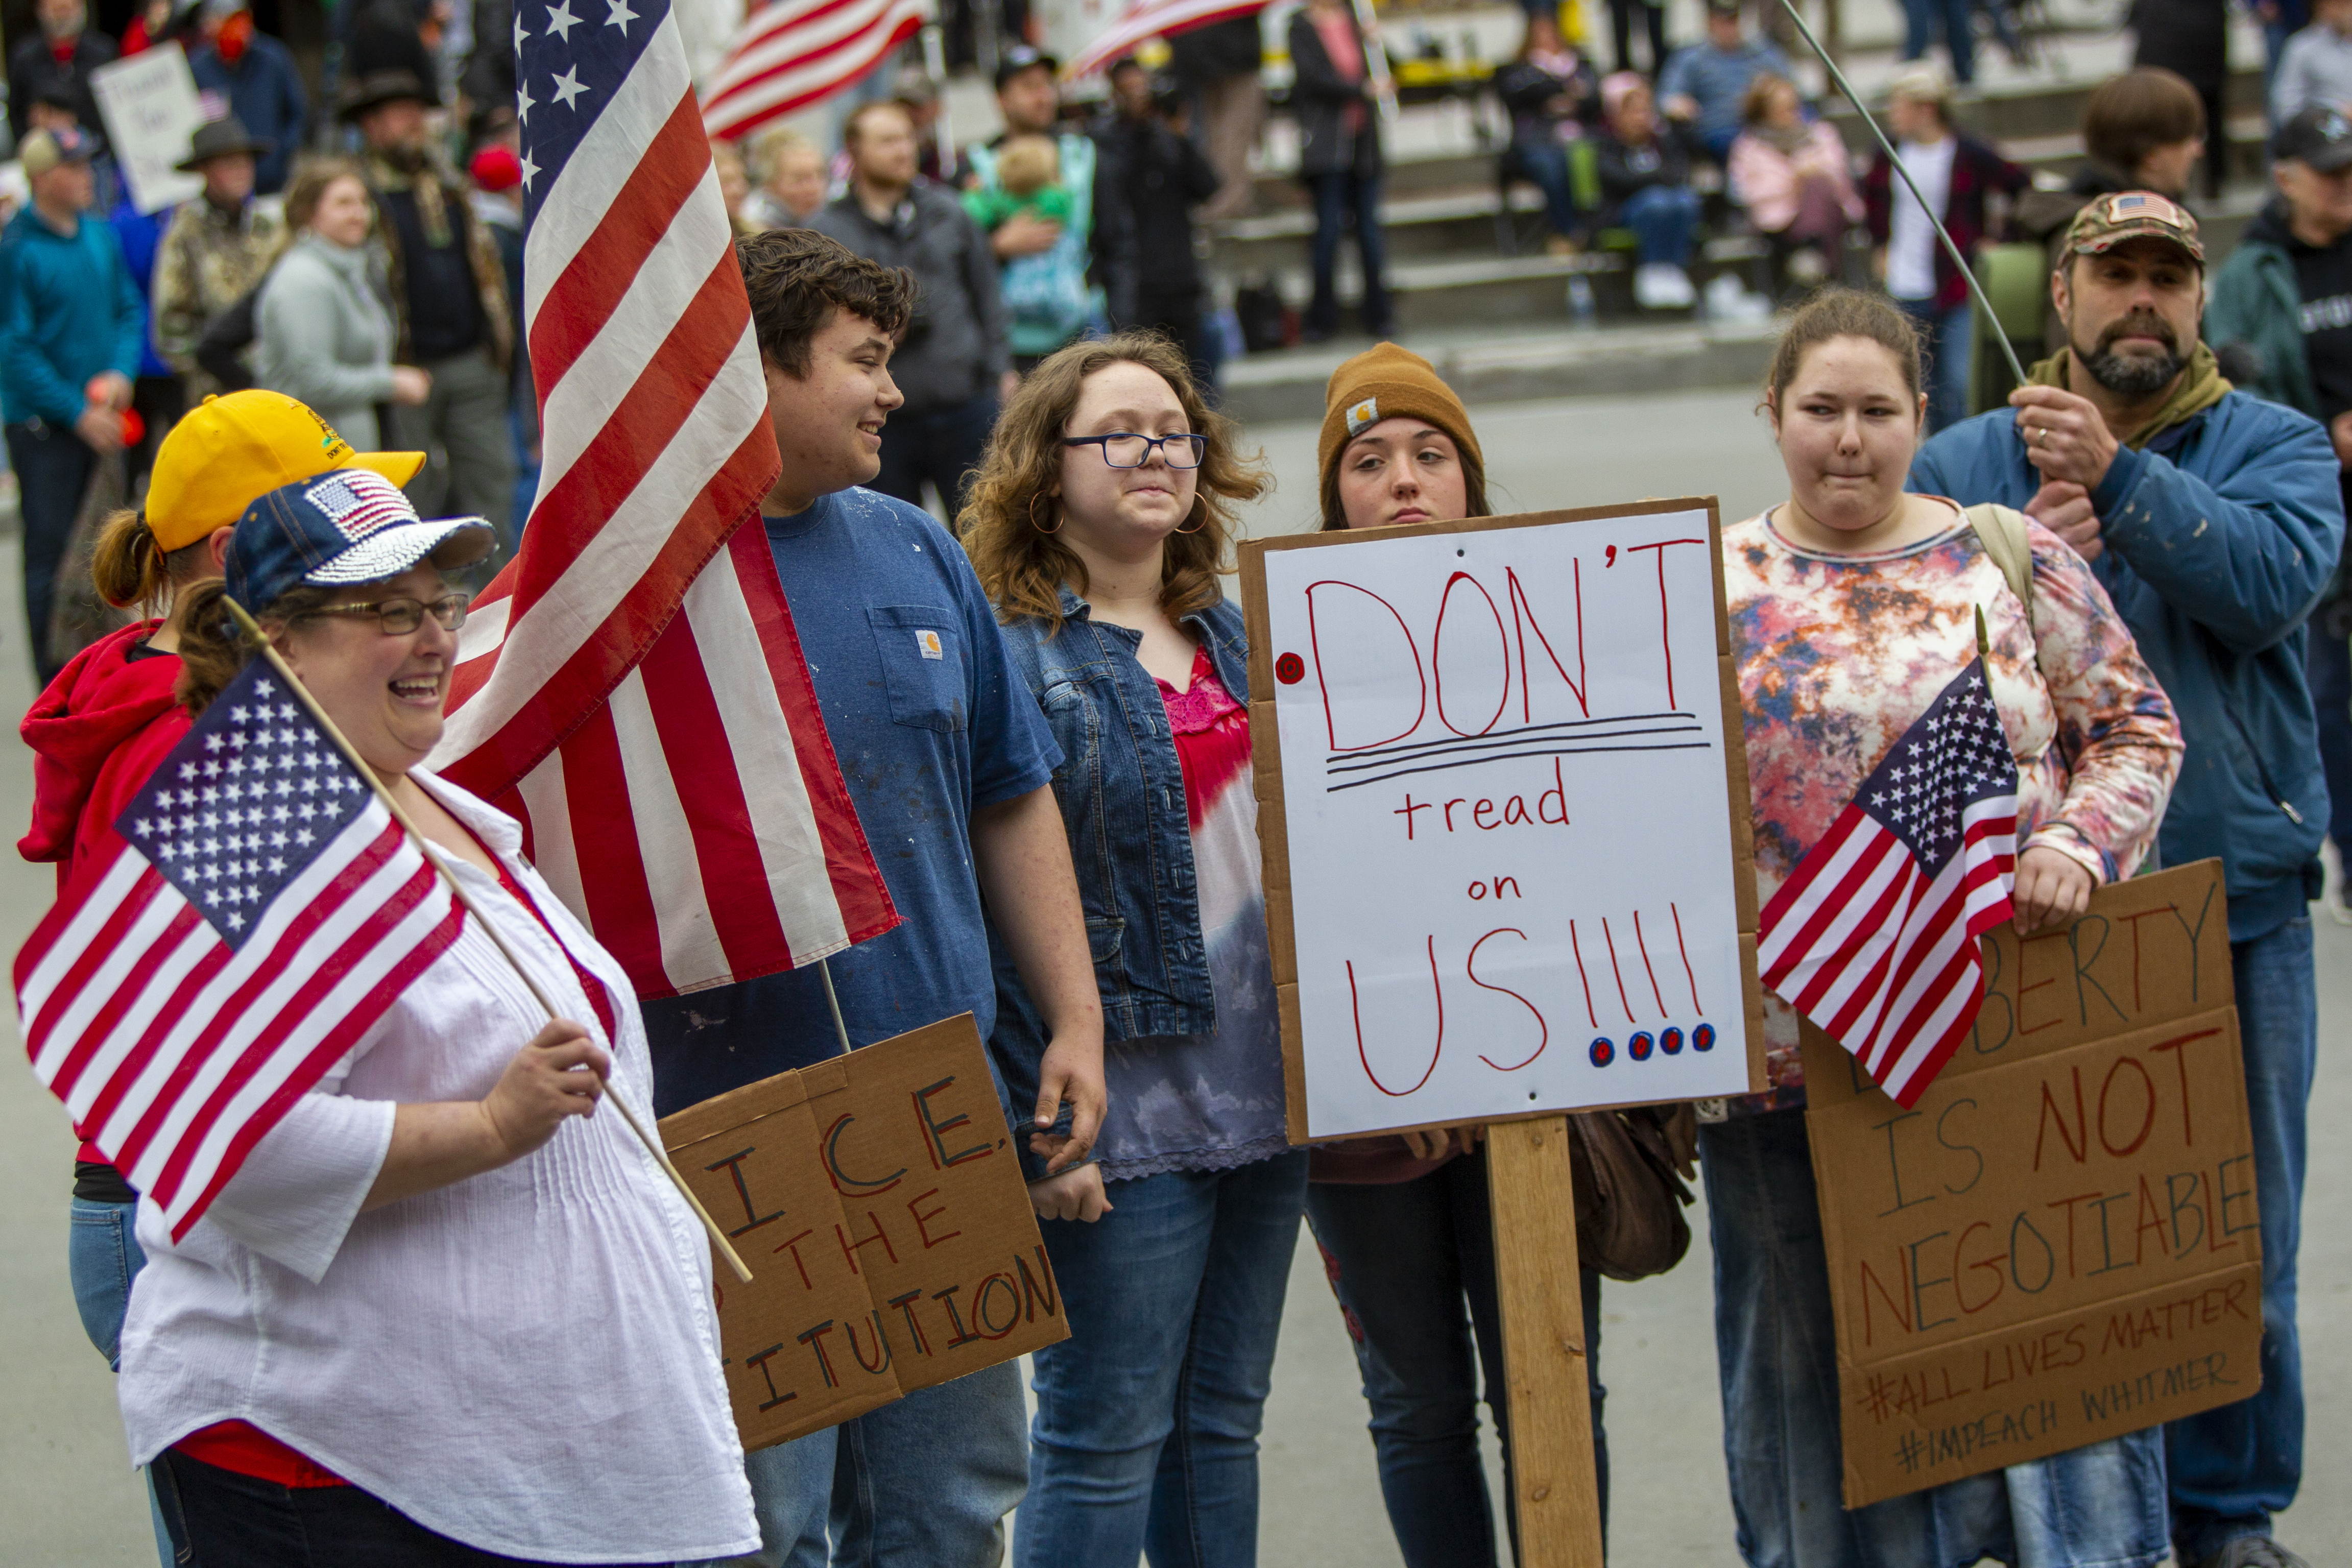 A crowd gathers for the "American Patriot Rally-Sheriffs speak out" event at Rosa Parks Circle in downtown Grand Rapids on Monday, May 18, 2020. The crowd is protesting against Gov. Gretchen Whitmer's stay-at-home order. (Cory Morse | MLive.com)